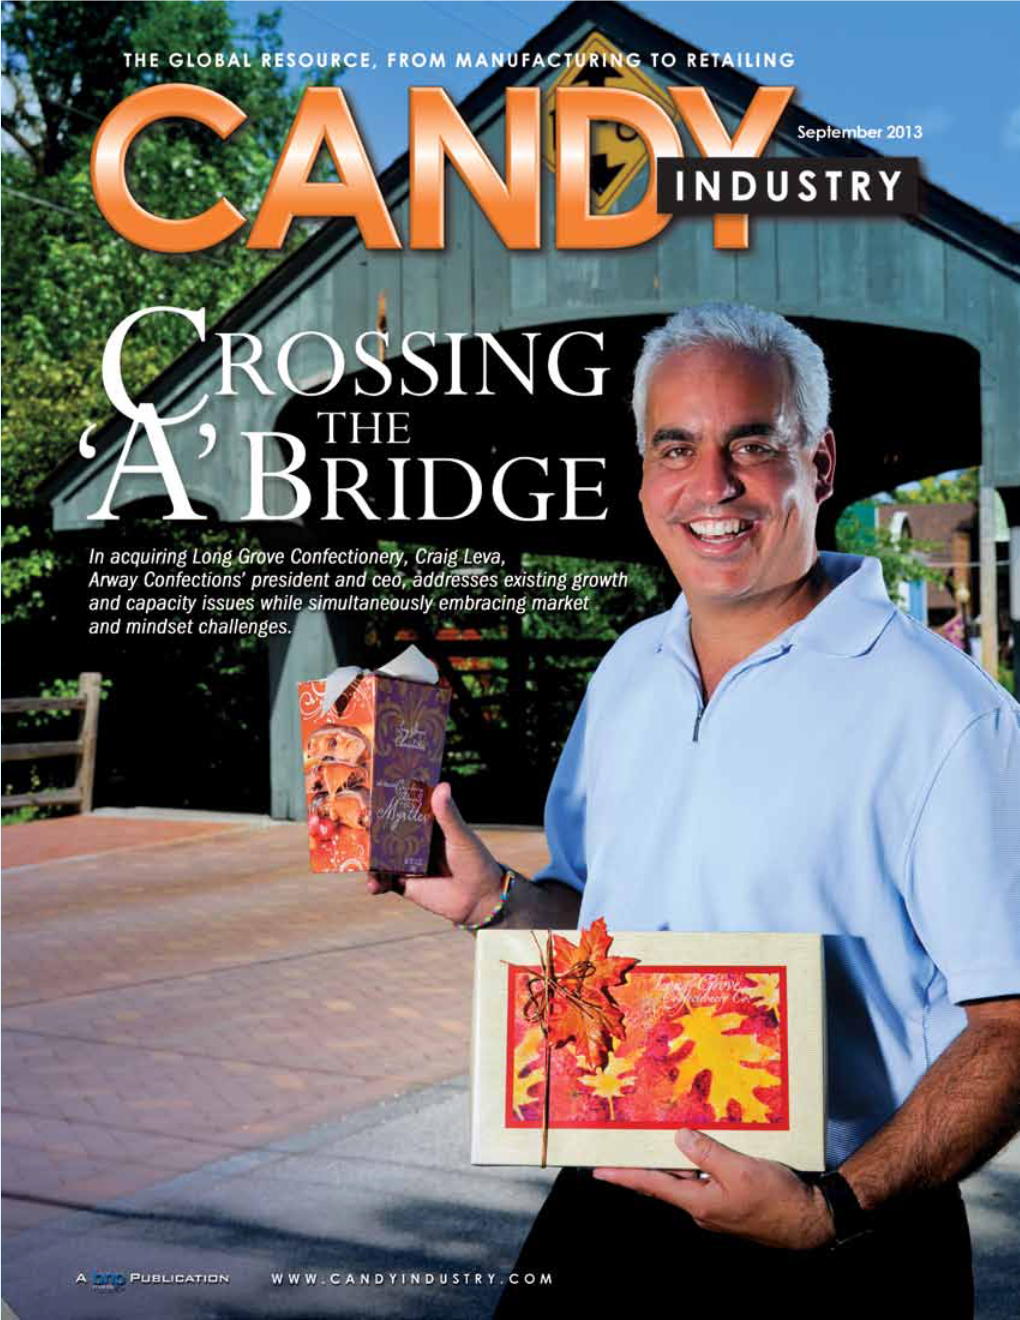 Candy Industry – Crossing the 'A' Bridge